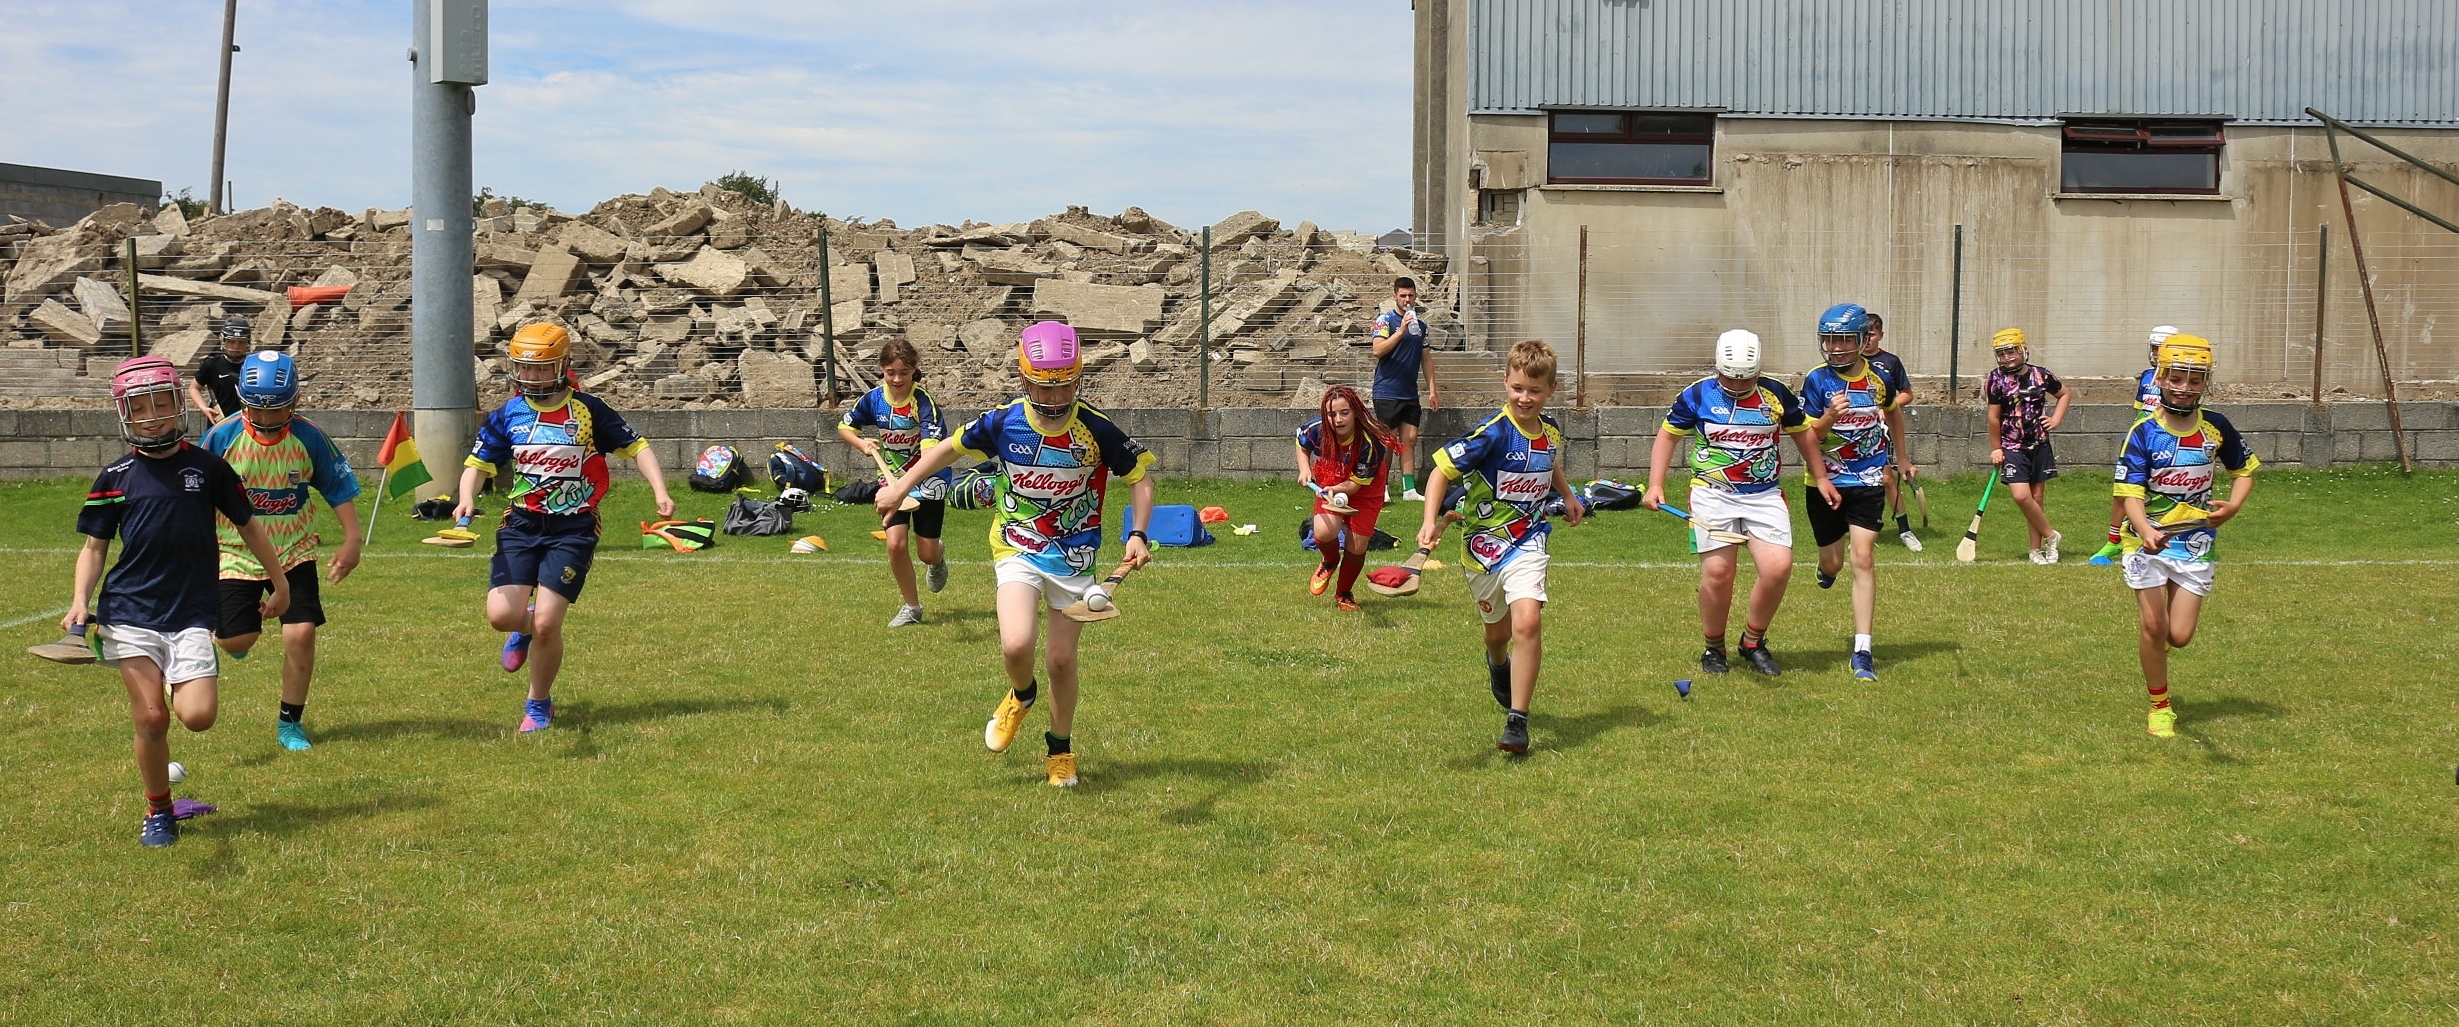 All The Kellogg’s Cúl Camp Action from Week 2 in another great week of GAA Fun in Bellefield, Hollymount, Buffers Alley, Bunclody, Kilmore, Castletown and Bannow